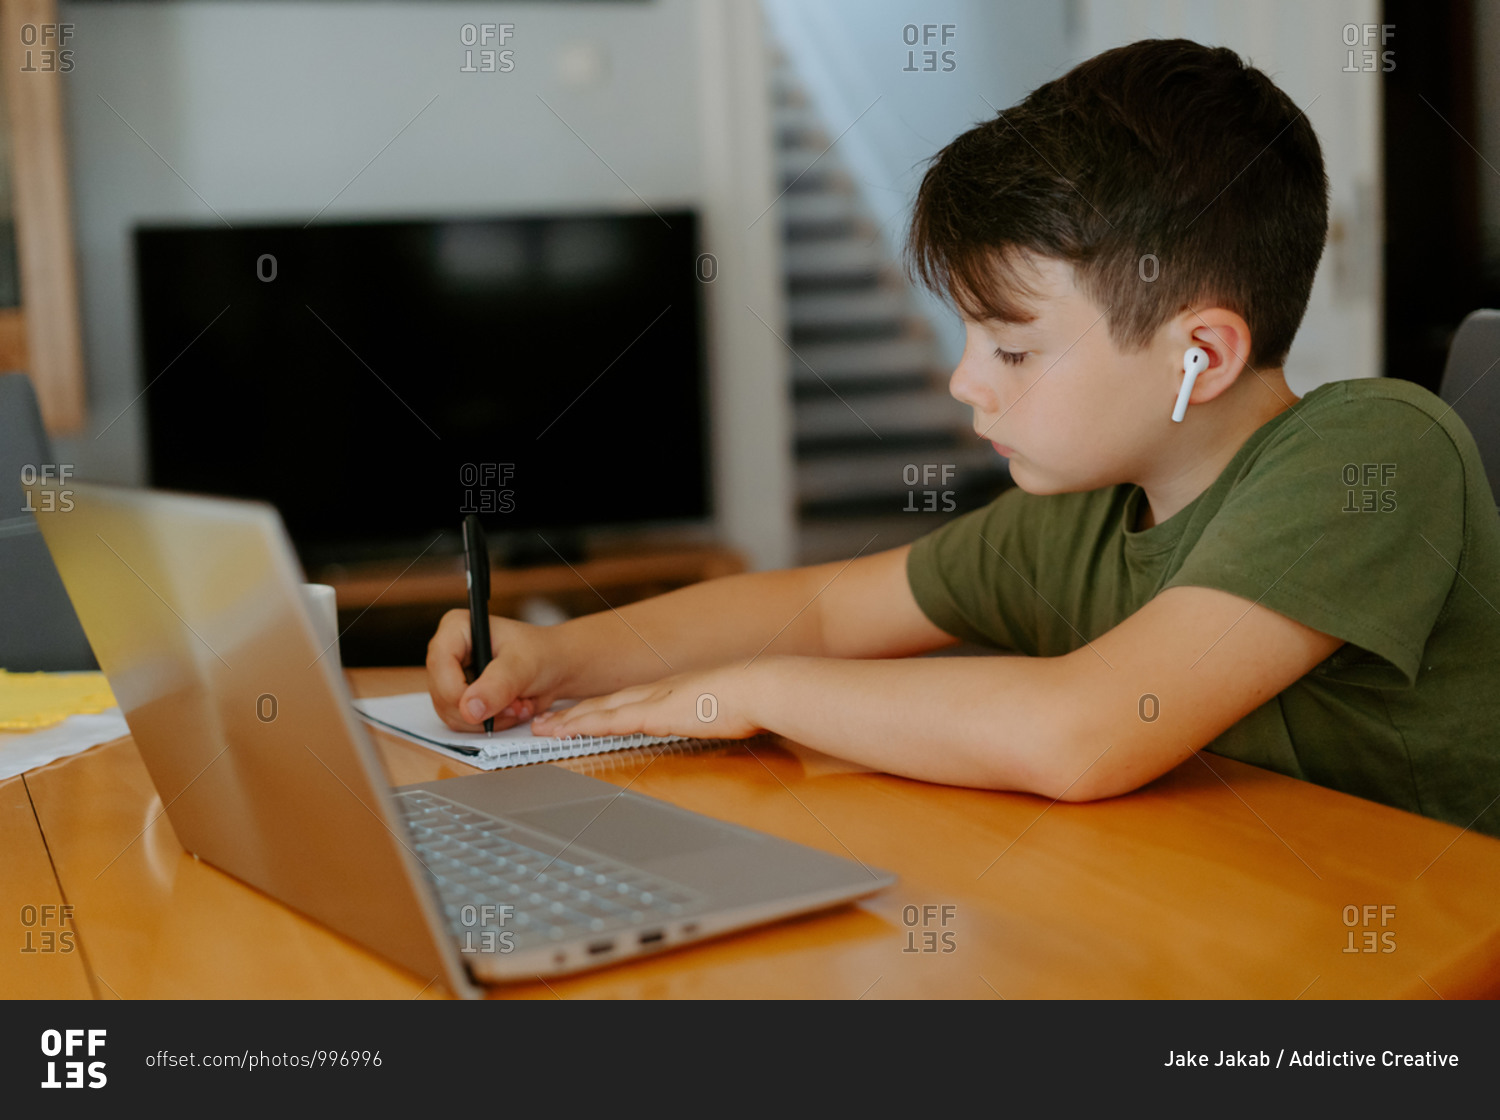 Side view of child writing in spiral notebook while doing homework assignment at table with cup of hot drink